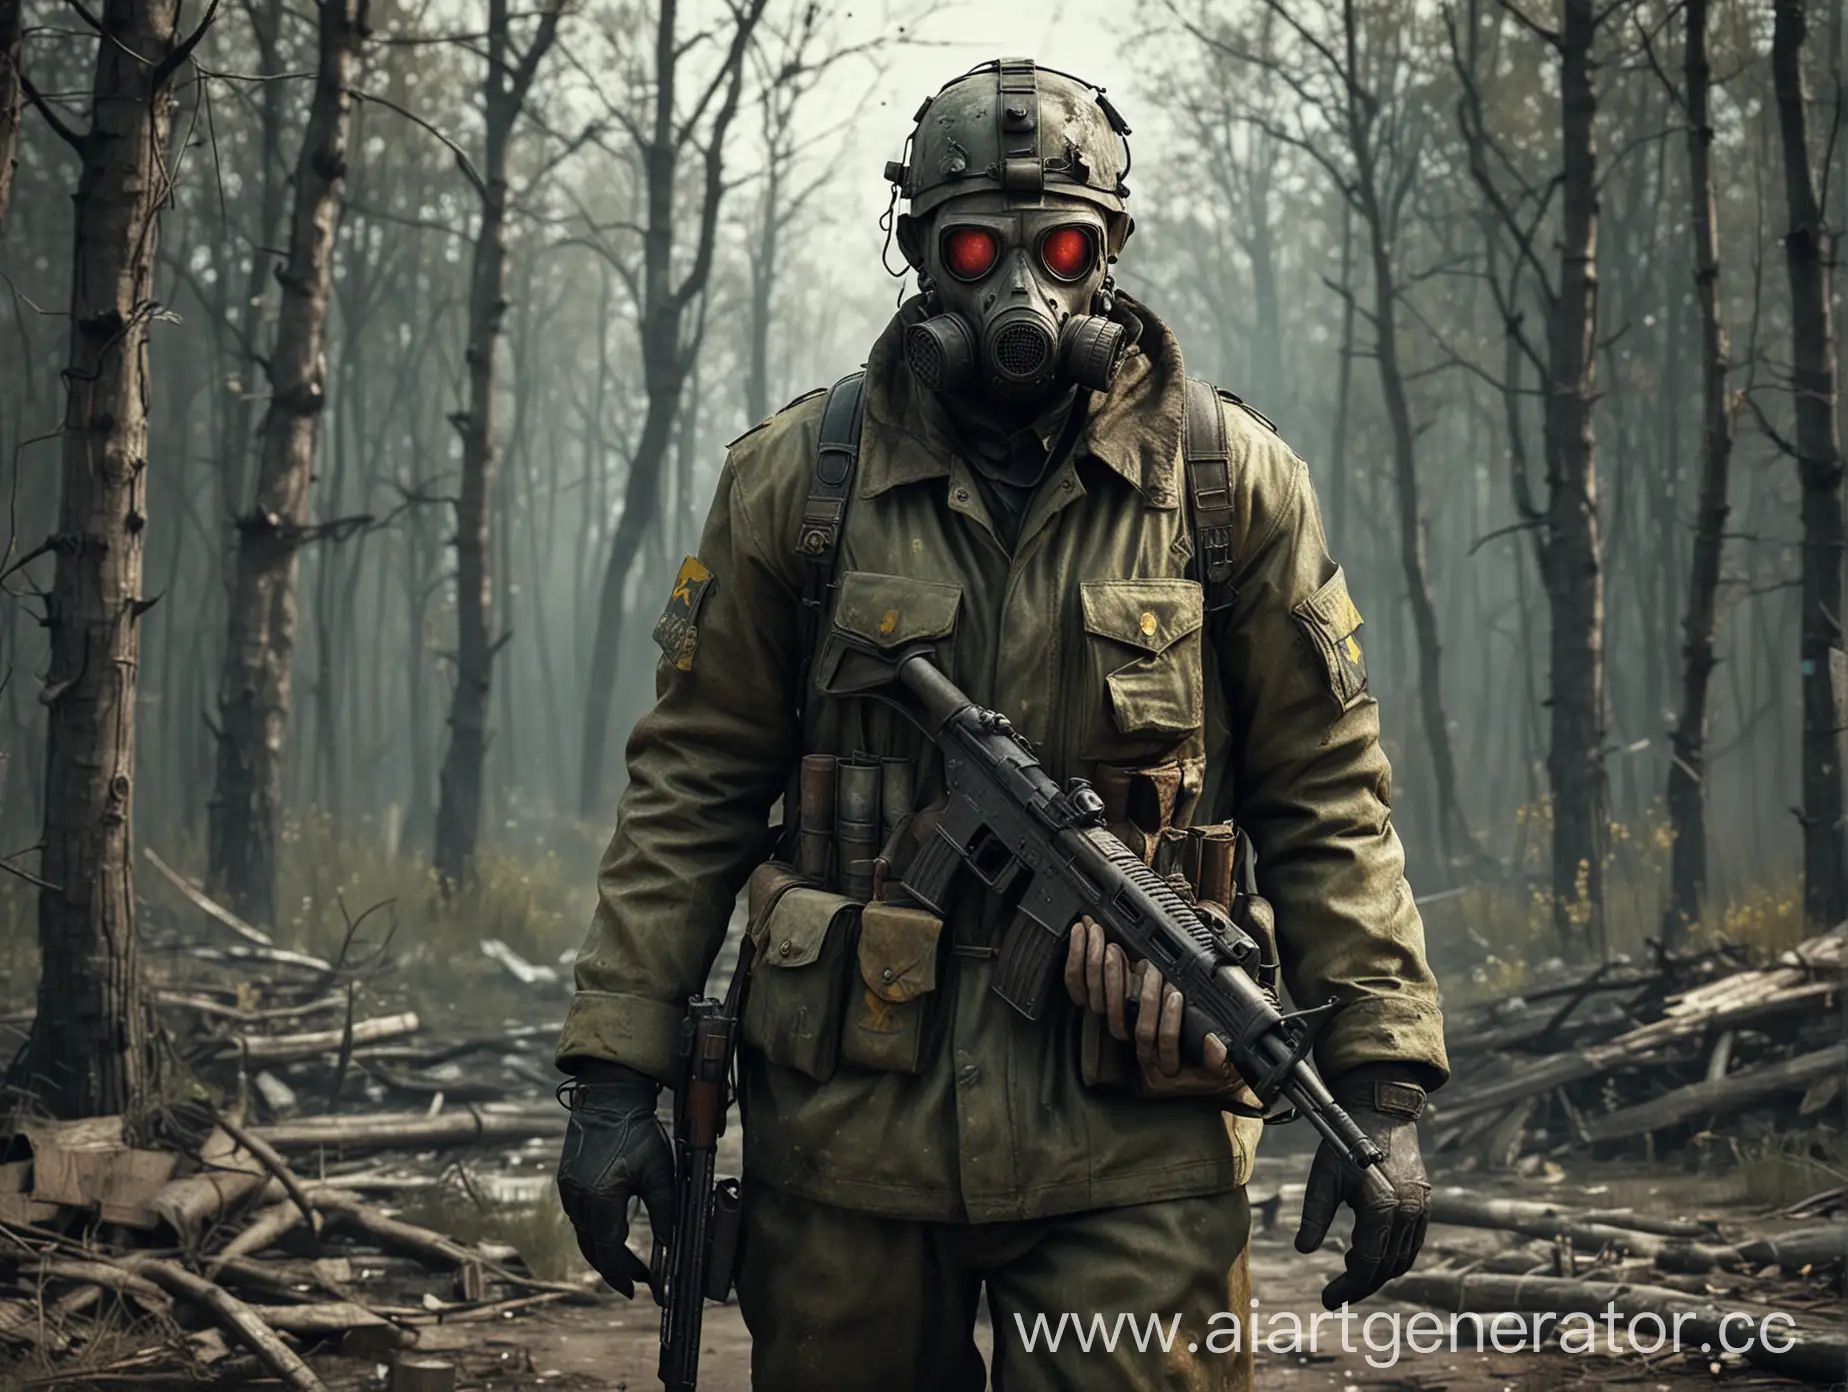 Stalker-from-the-Game-Chernobyl